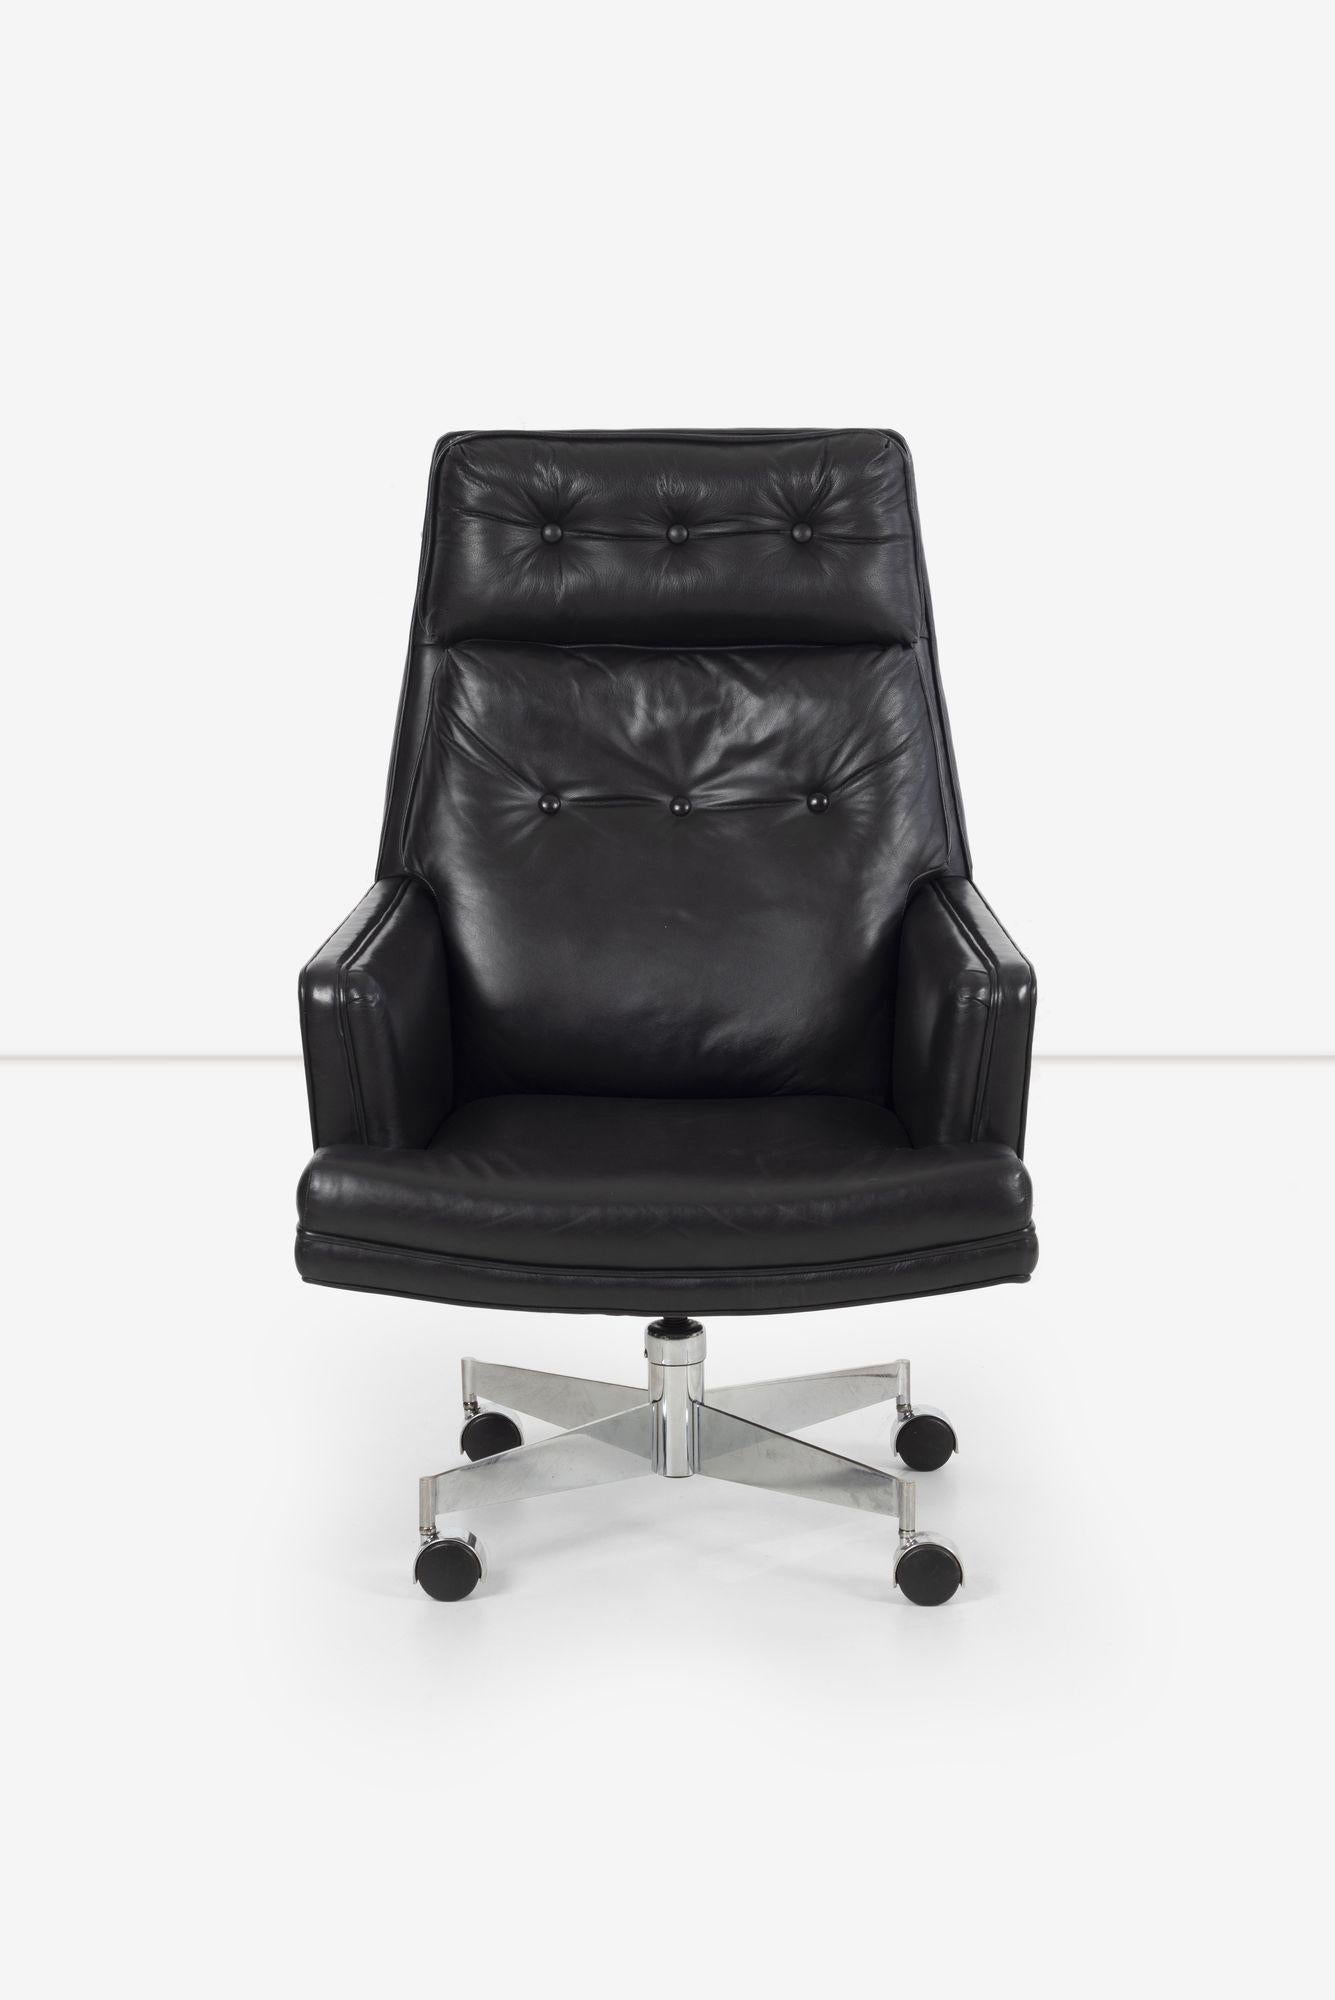 Edward Wormley for Dunbar Executive Chair with chrome plated steel base on castors, features button tufted back and headrest in original black leather, swivel functionality, and a tilt mechanism with a tension lever to secure the desired tilt